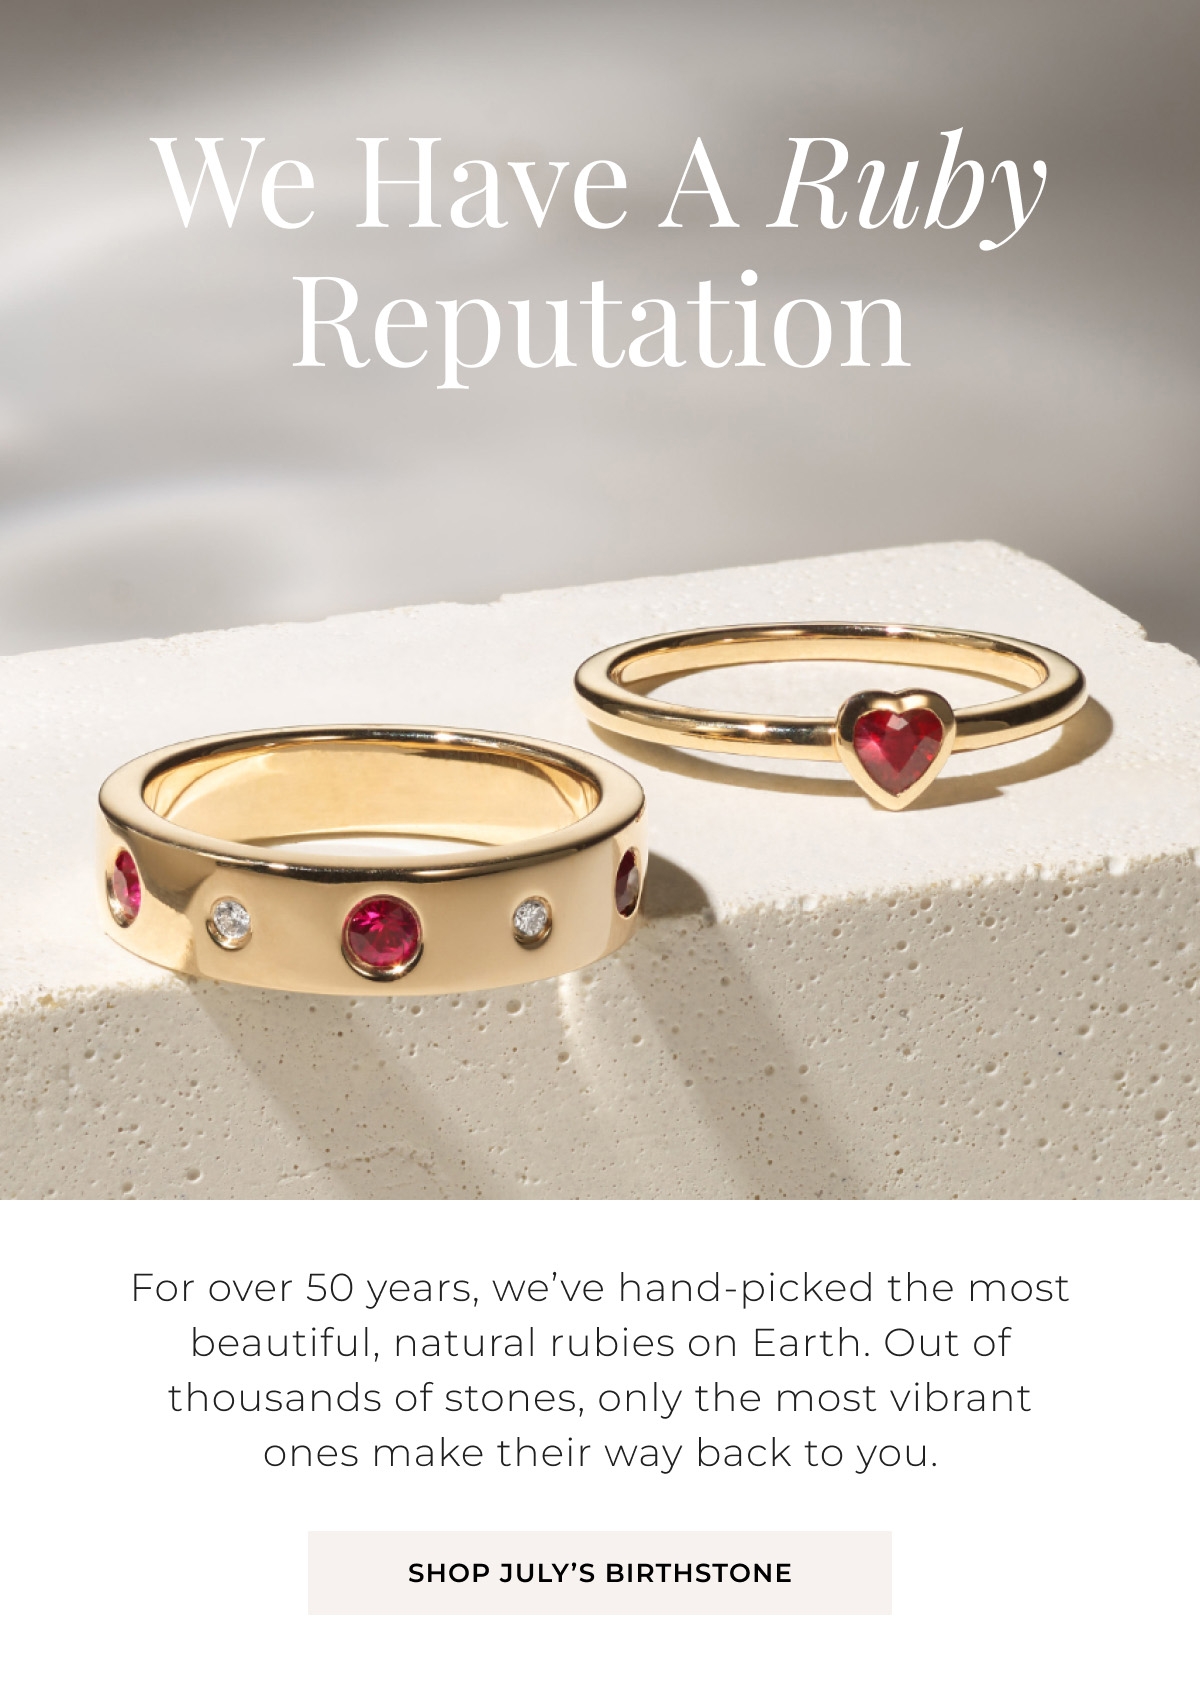 We Have A Ruby Reputation - For over 50 years, weve hand-picked the most beautiful, natural rubies on Earth. Out of thousands of stones, only the most vibrant ones make their way back to you. Shop Julys Birthstone >